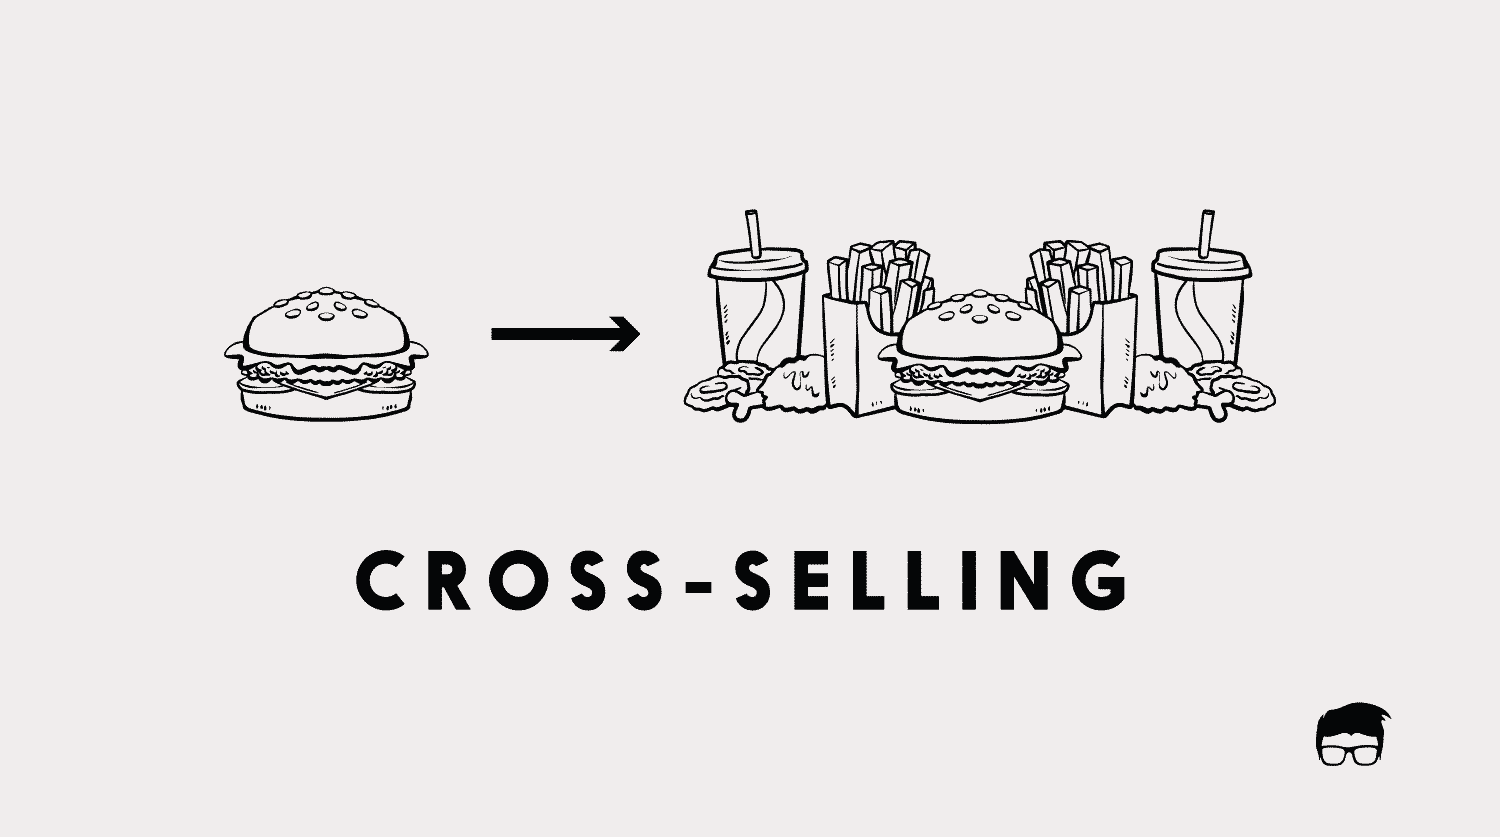 Cross-Selling - Definition, Importance, Examples, & Strategies